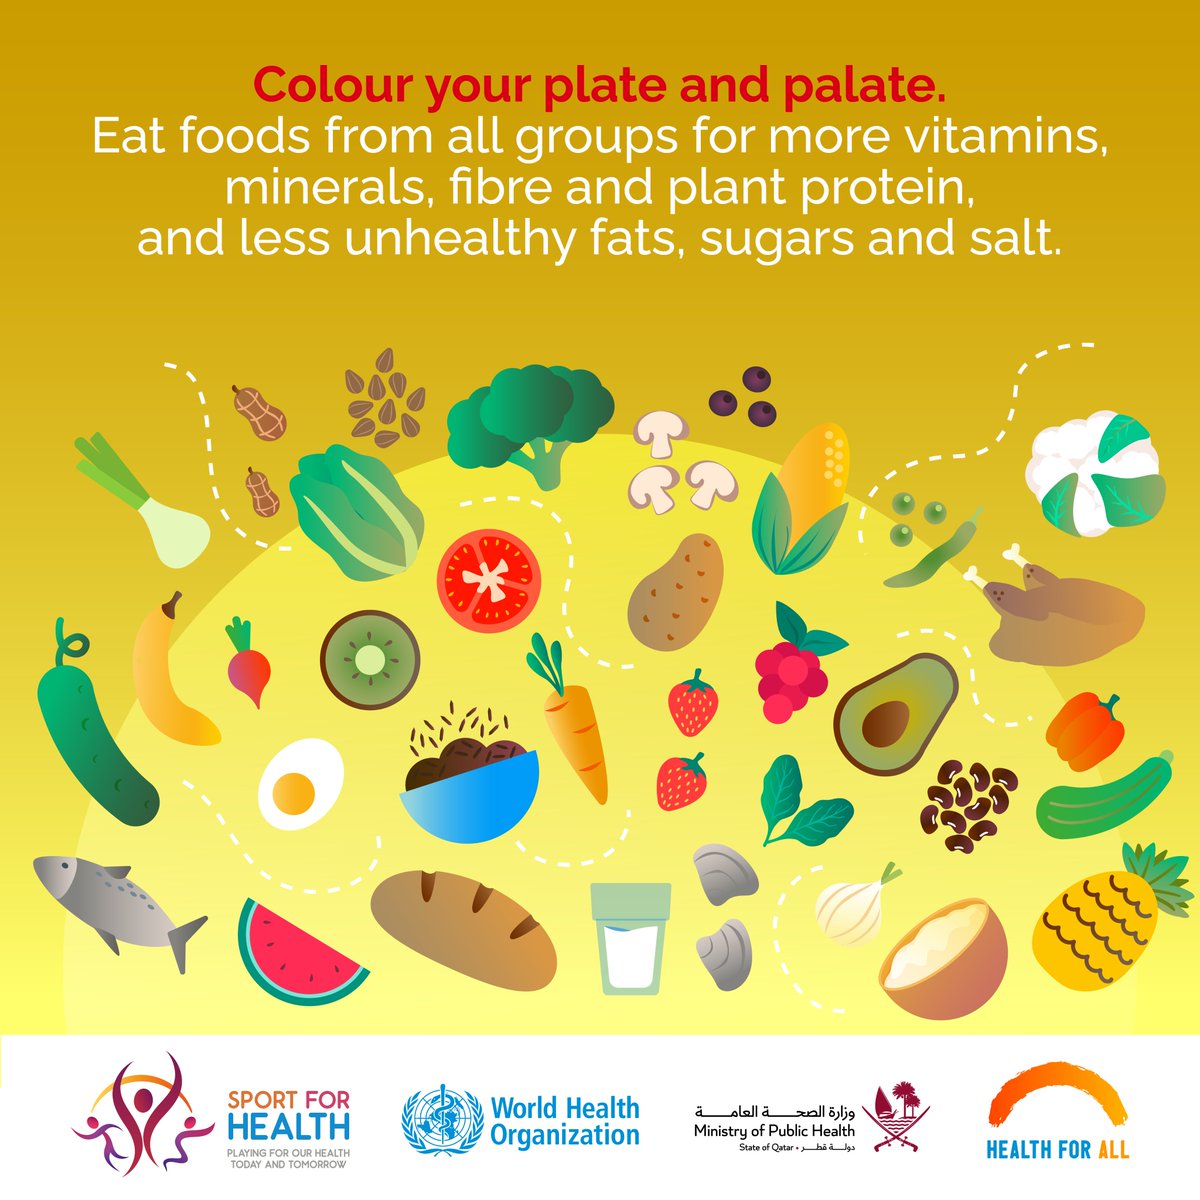 During this festive season, ensure that you have a healthy and balanced diet! Don't forget to include foods from all groups in your meals. 🍚🫘 🥬🍎🍞🍄🥕🥝🍍🥗🐟 #healthydiet